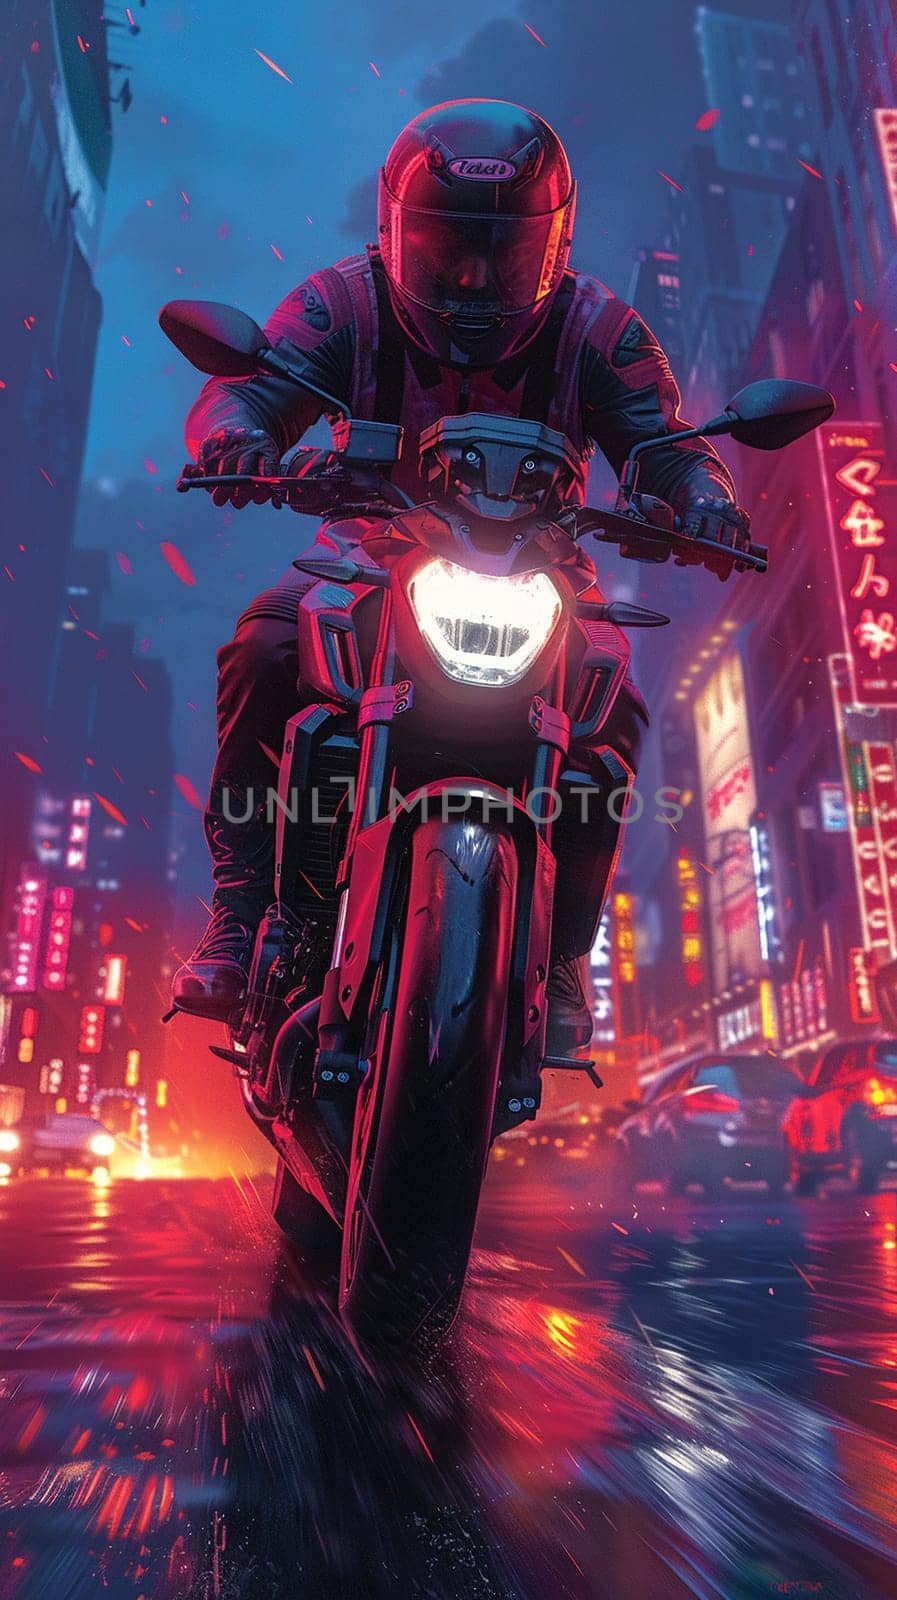 Motorcycle ride through the city animated in vibrant by Benzoix